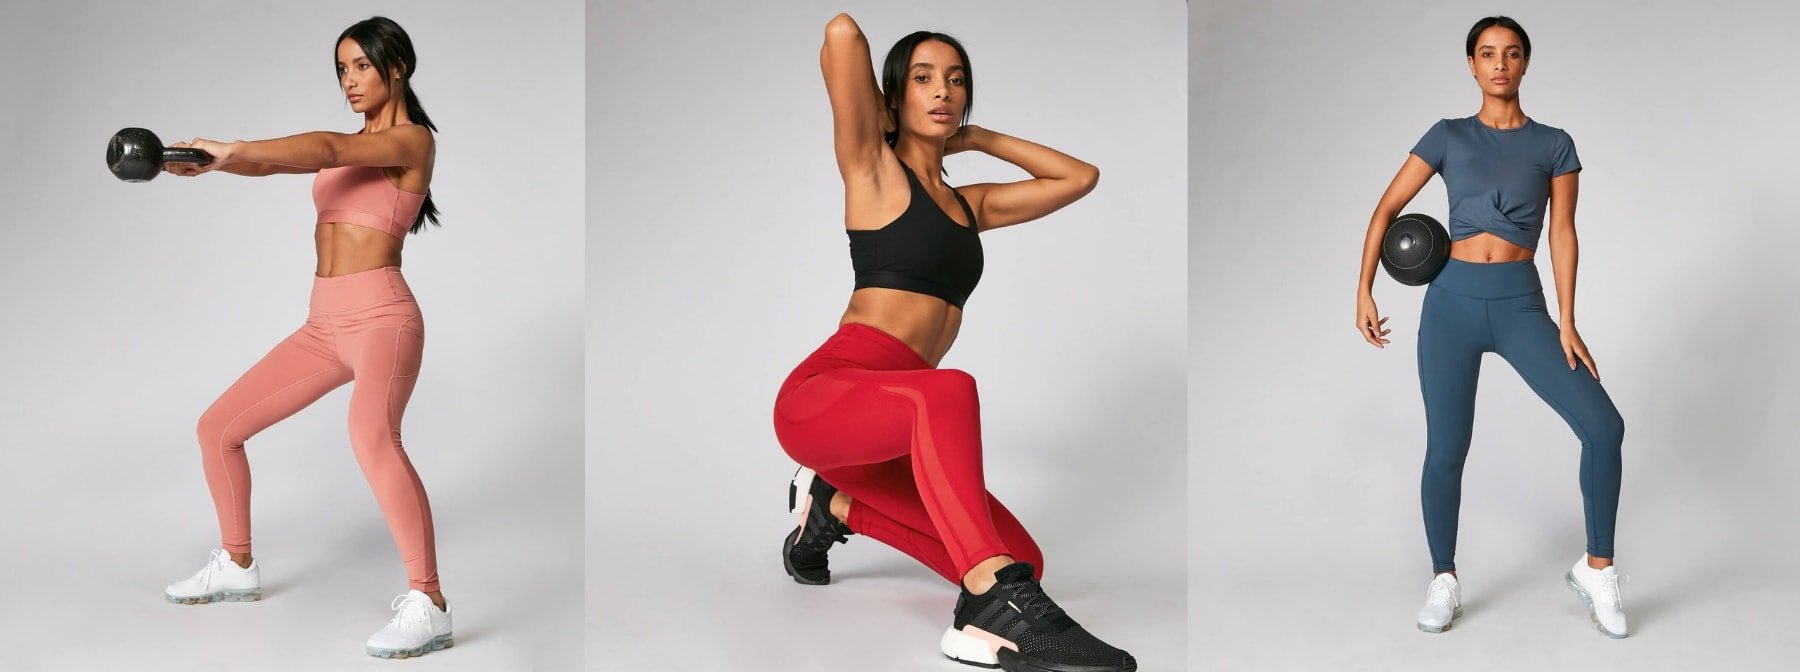 4 Leggings To Cover Every Training Type — *Adds All To Basket